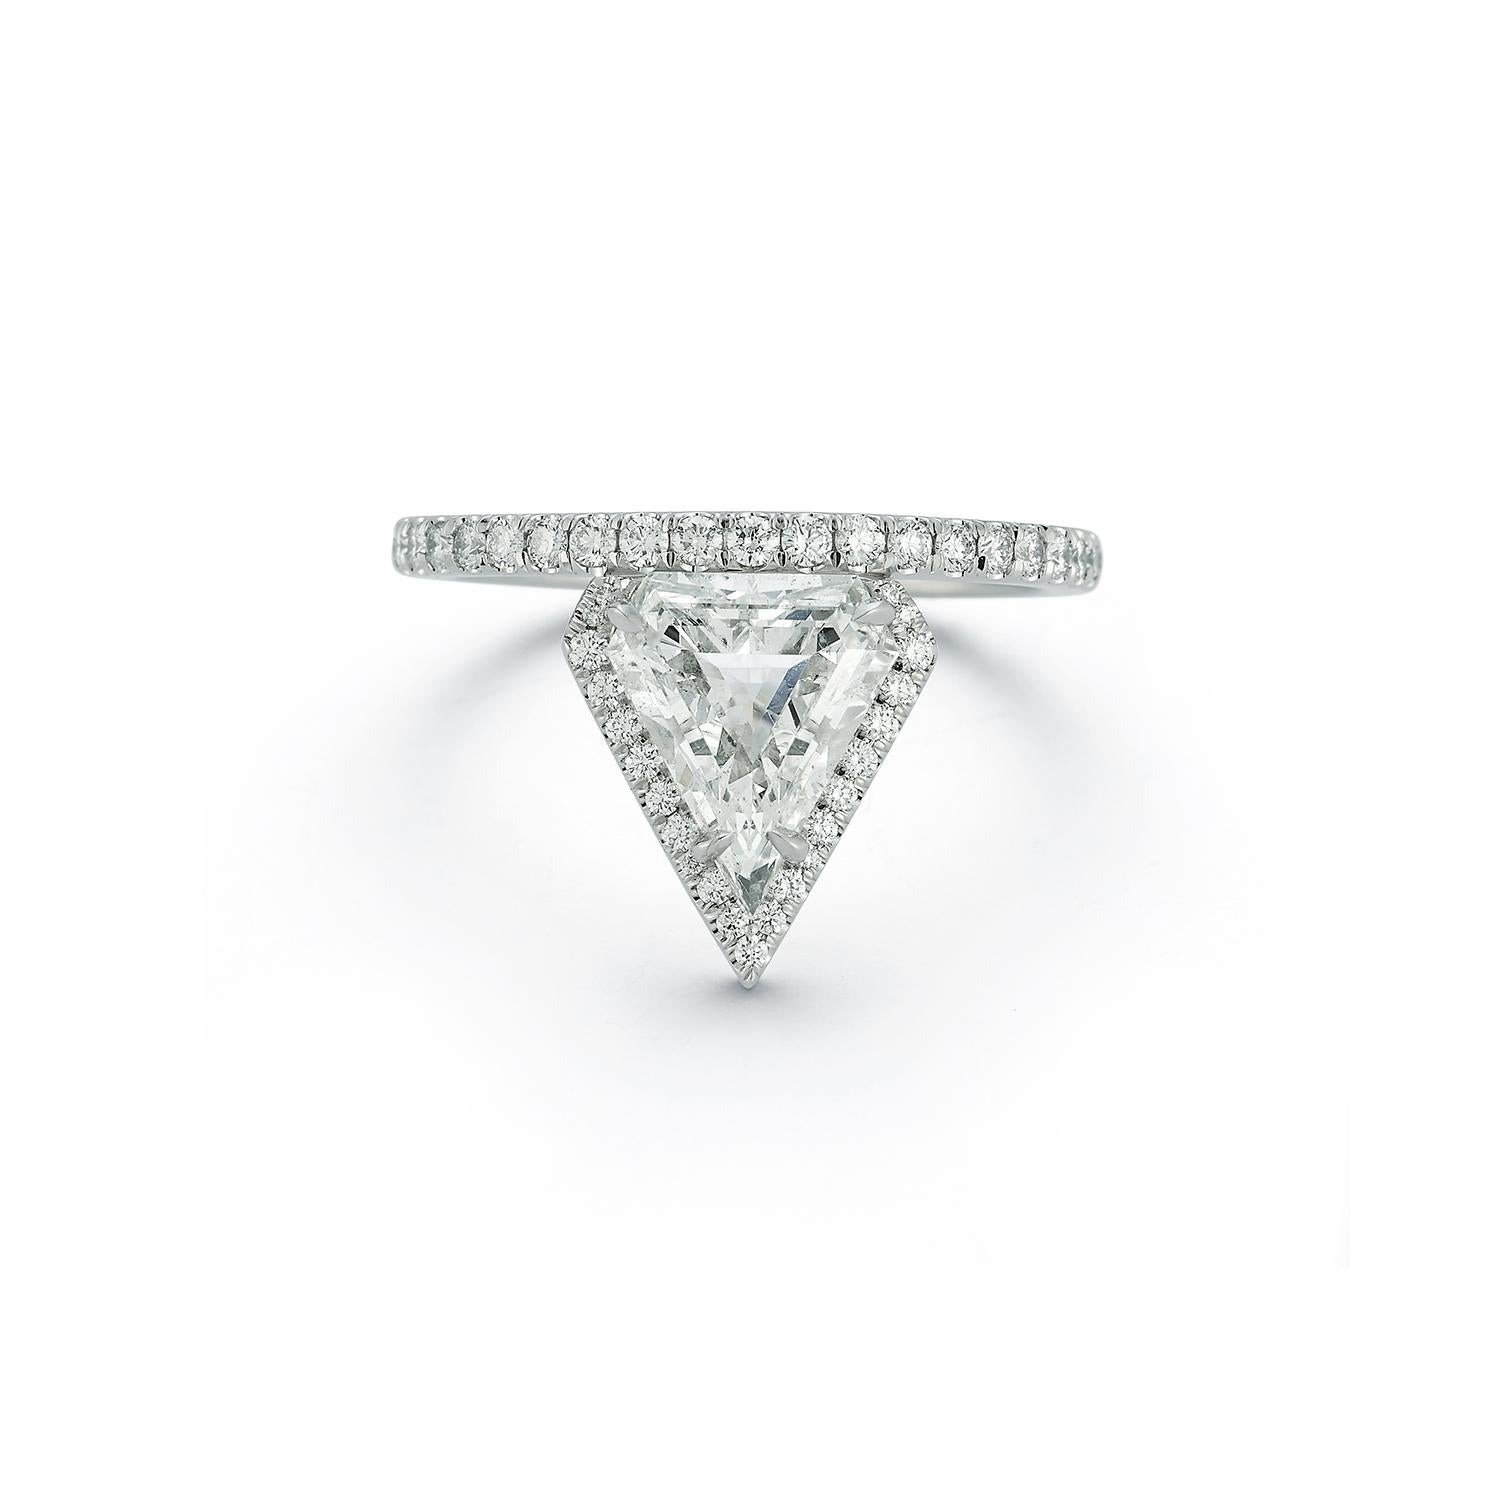 Our Diamond Shield Isadora Ring is truly one-of-a-kind. Boasting a gorgeous rare white diamond shield center stone with hand set micro-pave diamonds around and on the band. 
At Jemma Wynne, we believe fine jewelry is an expression of self. Our world